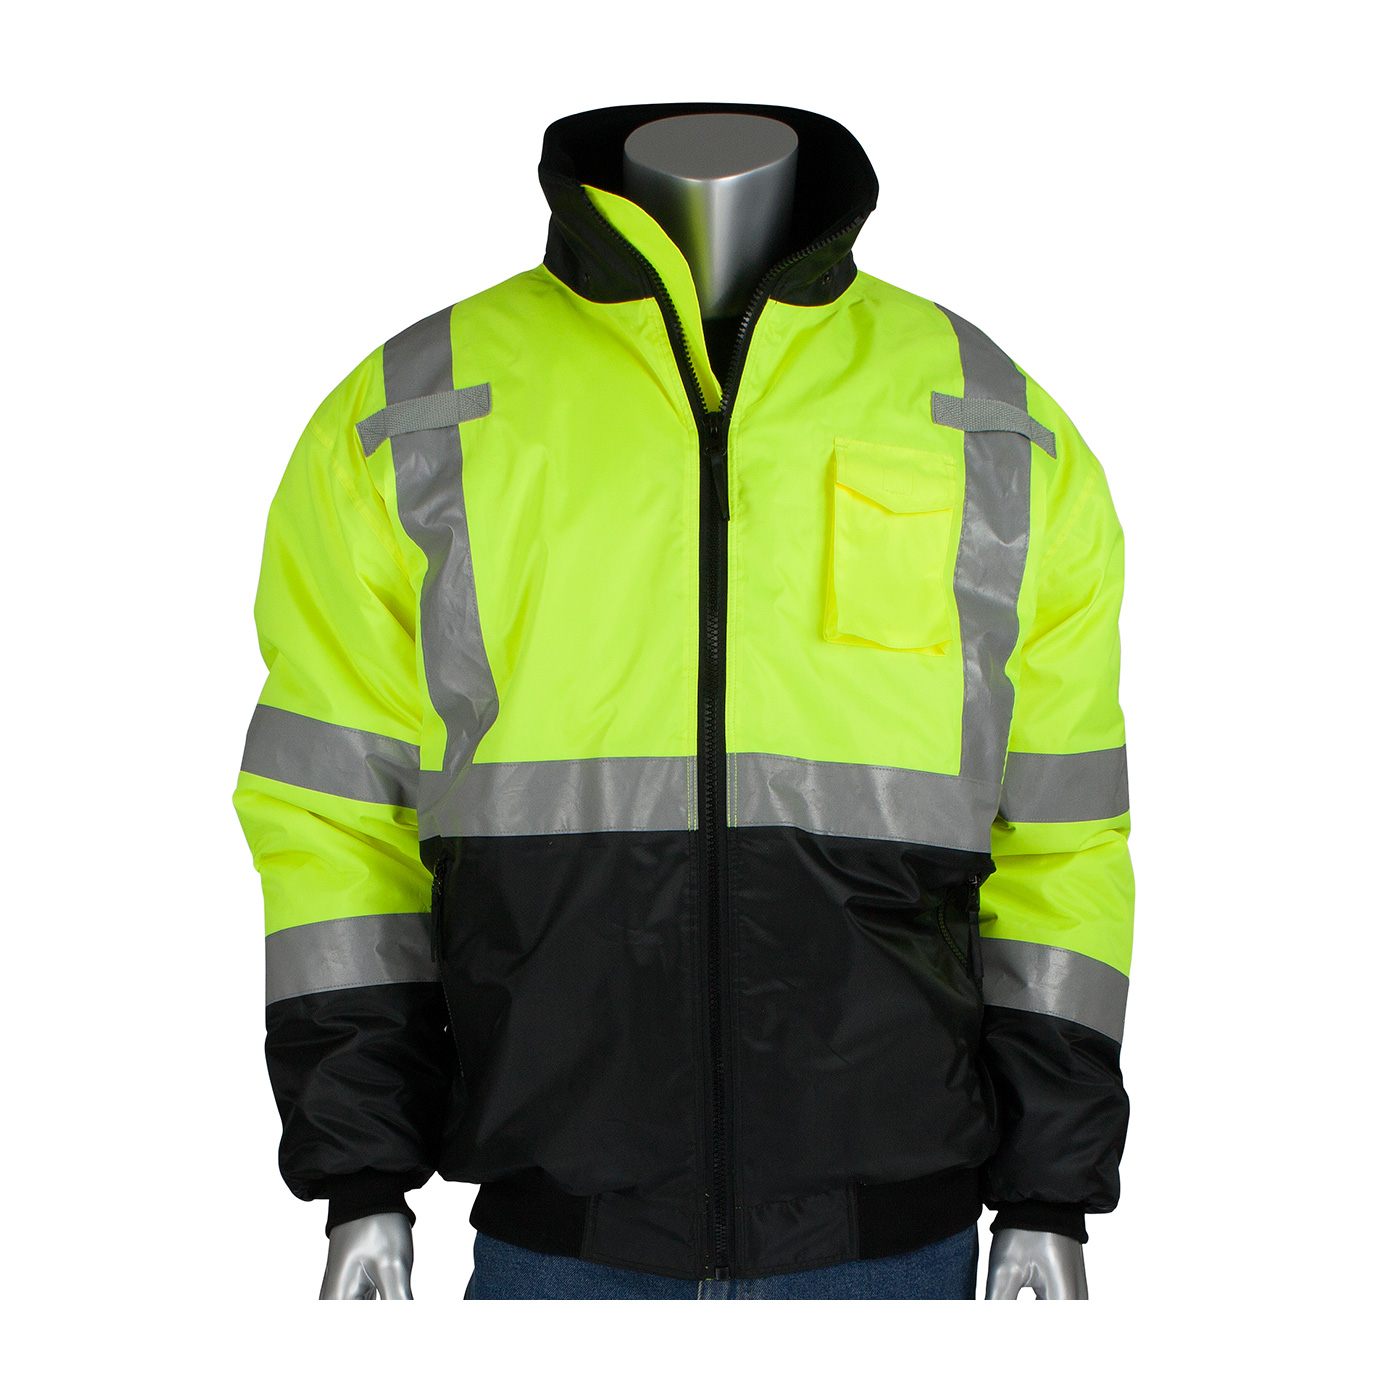 PIP Lime Class 3 Fleece Liner Jacket - Clothing